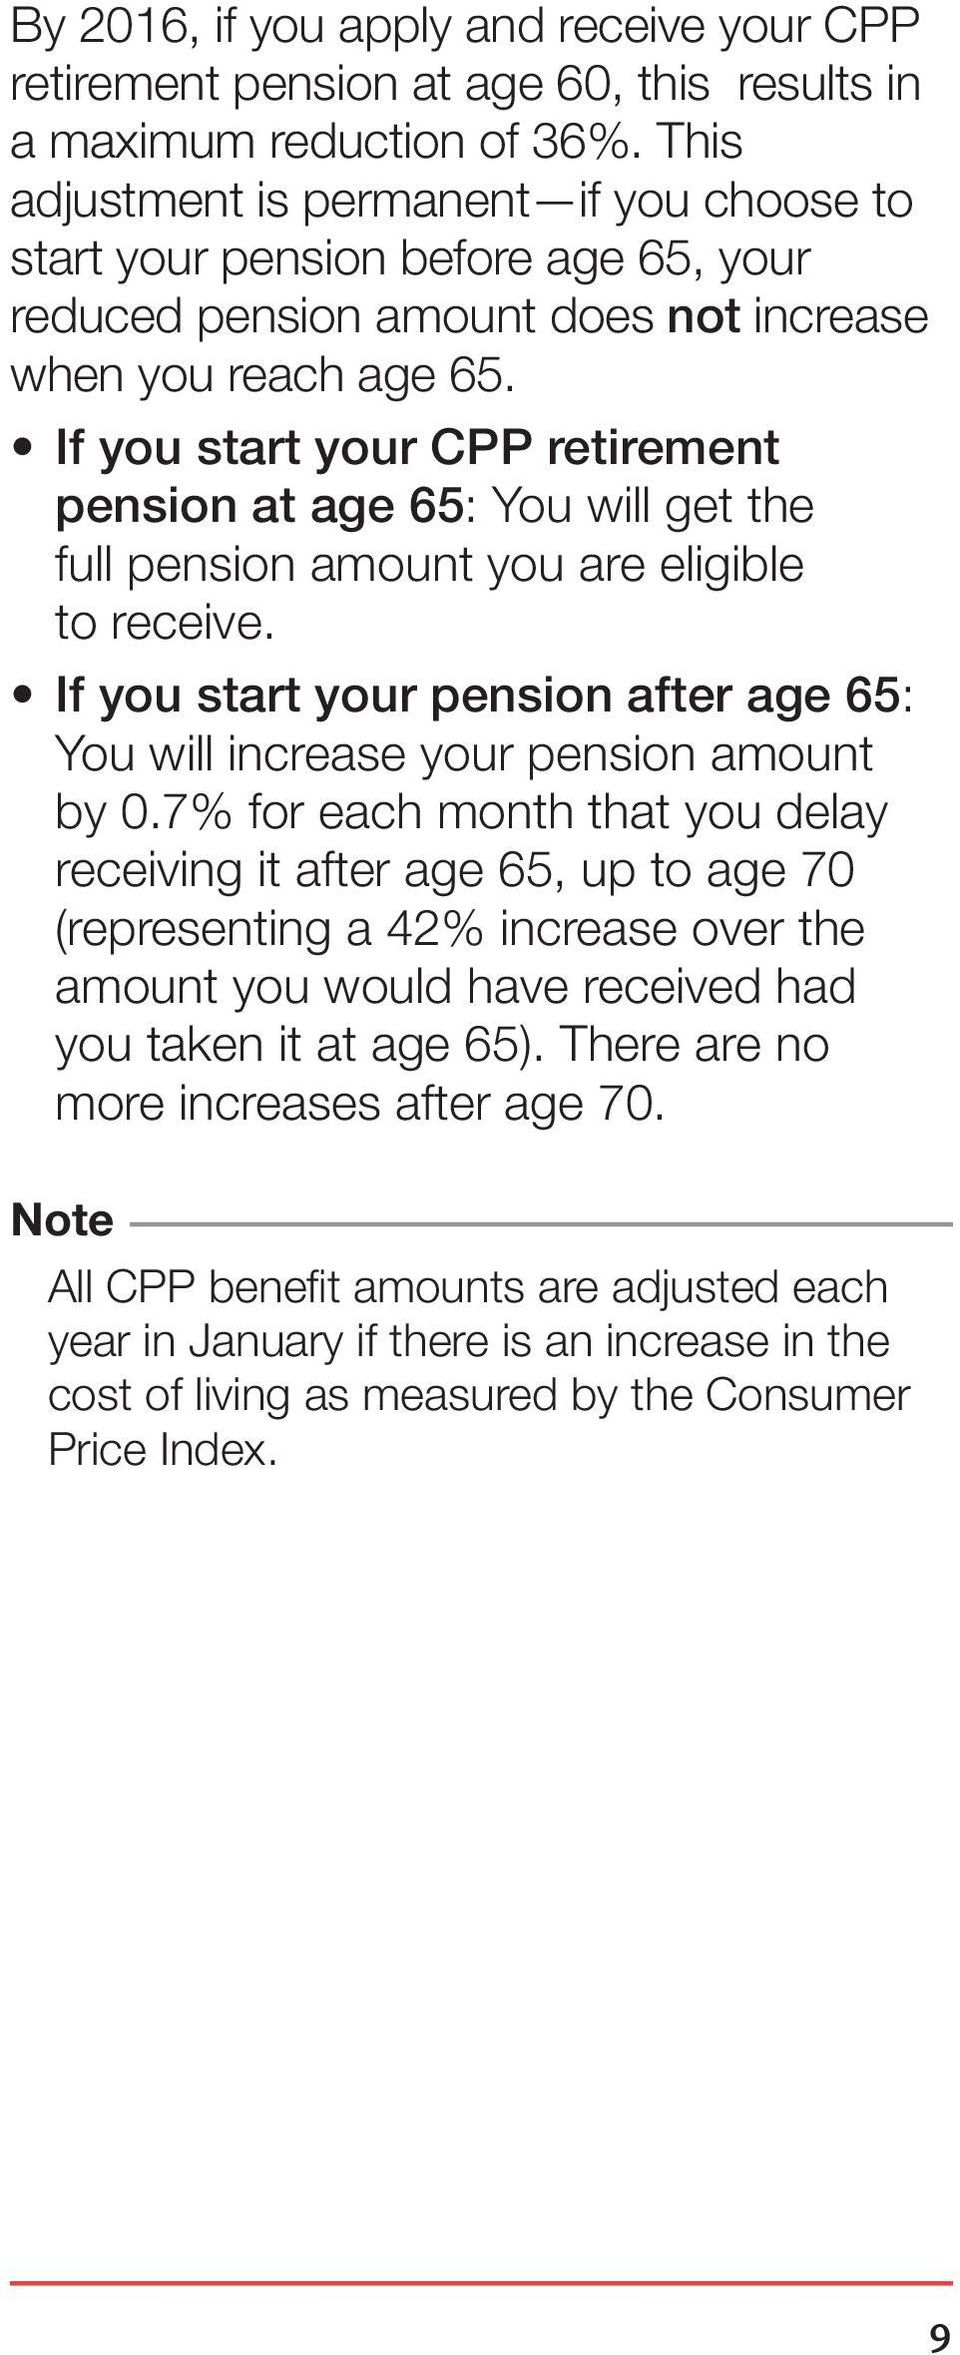 If you start your CPP retirement pension at age 65: You will get the full pension amount you are eligible to receive.